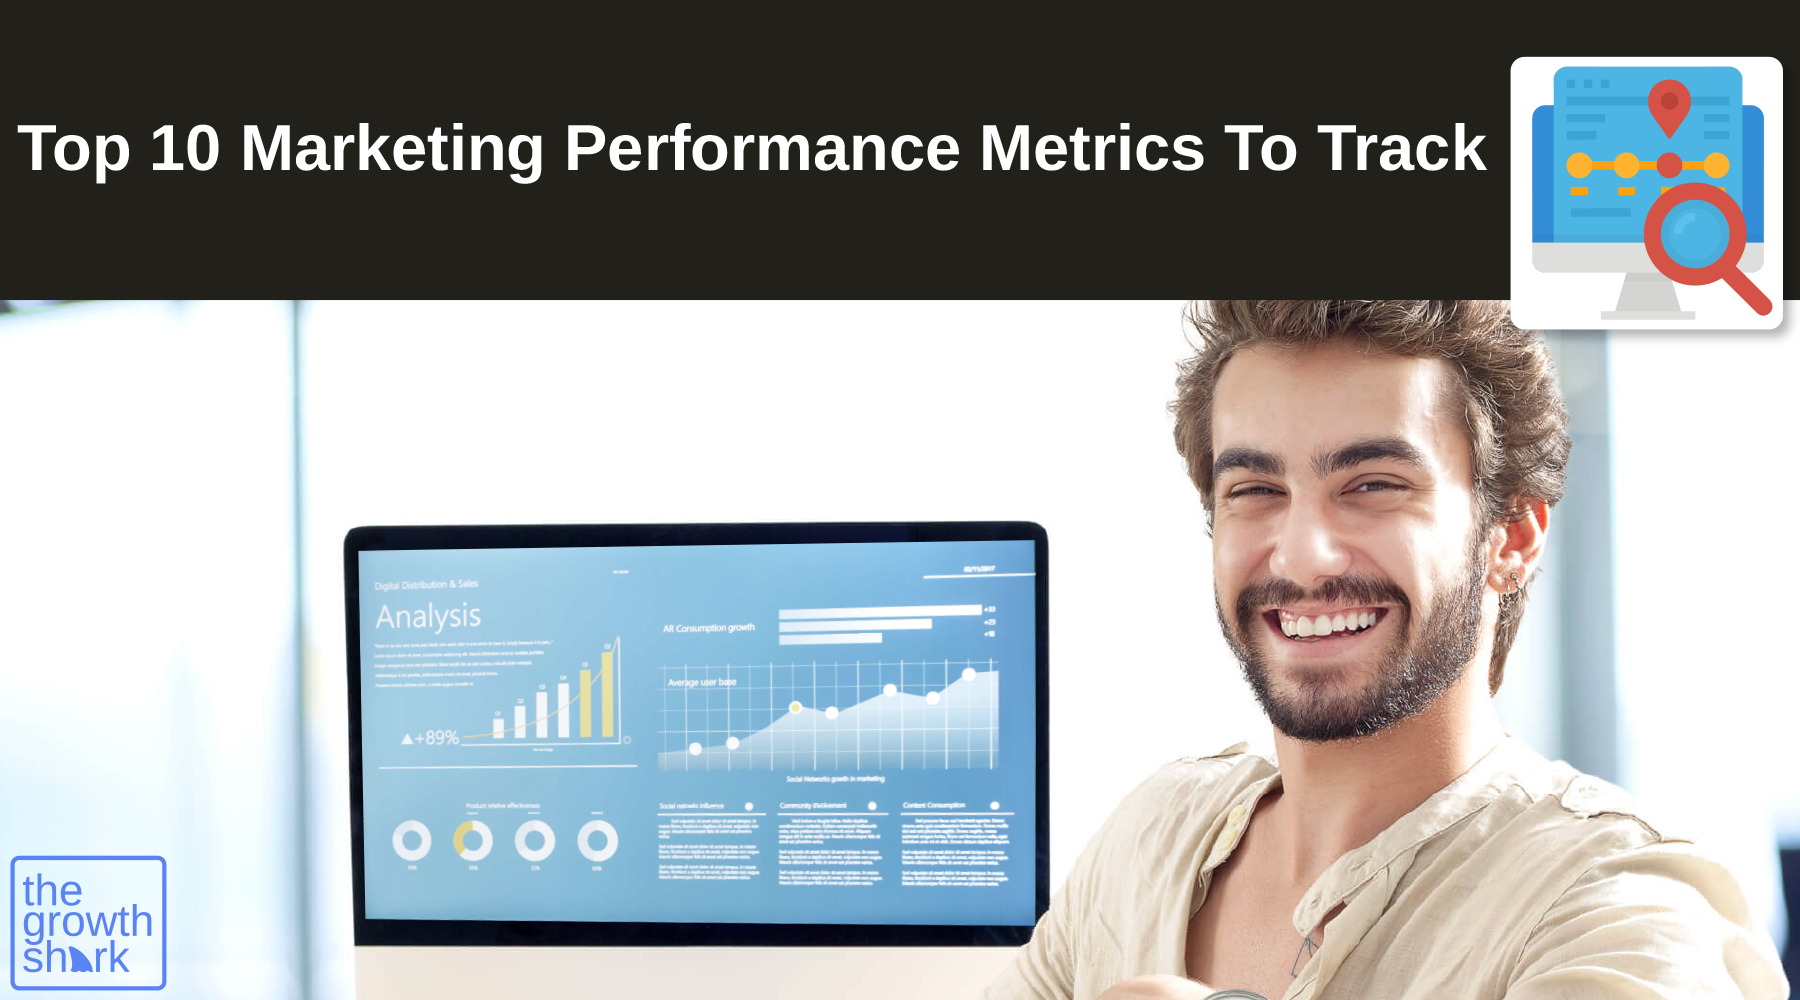 These are some of the most important marketing performance metrics to track in your business